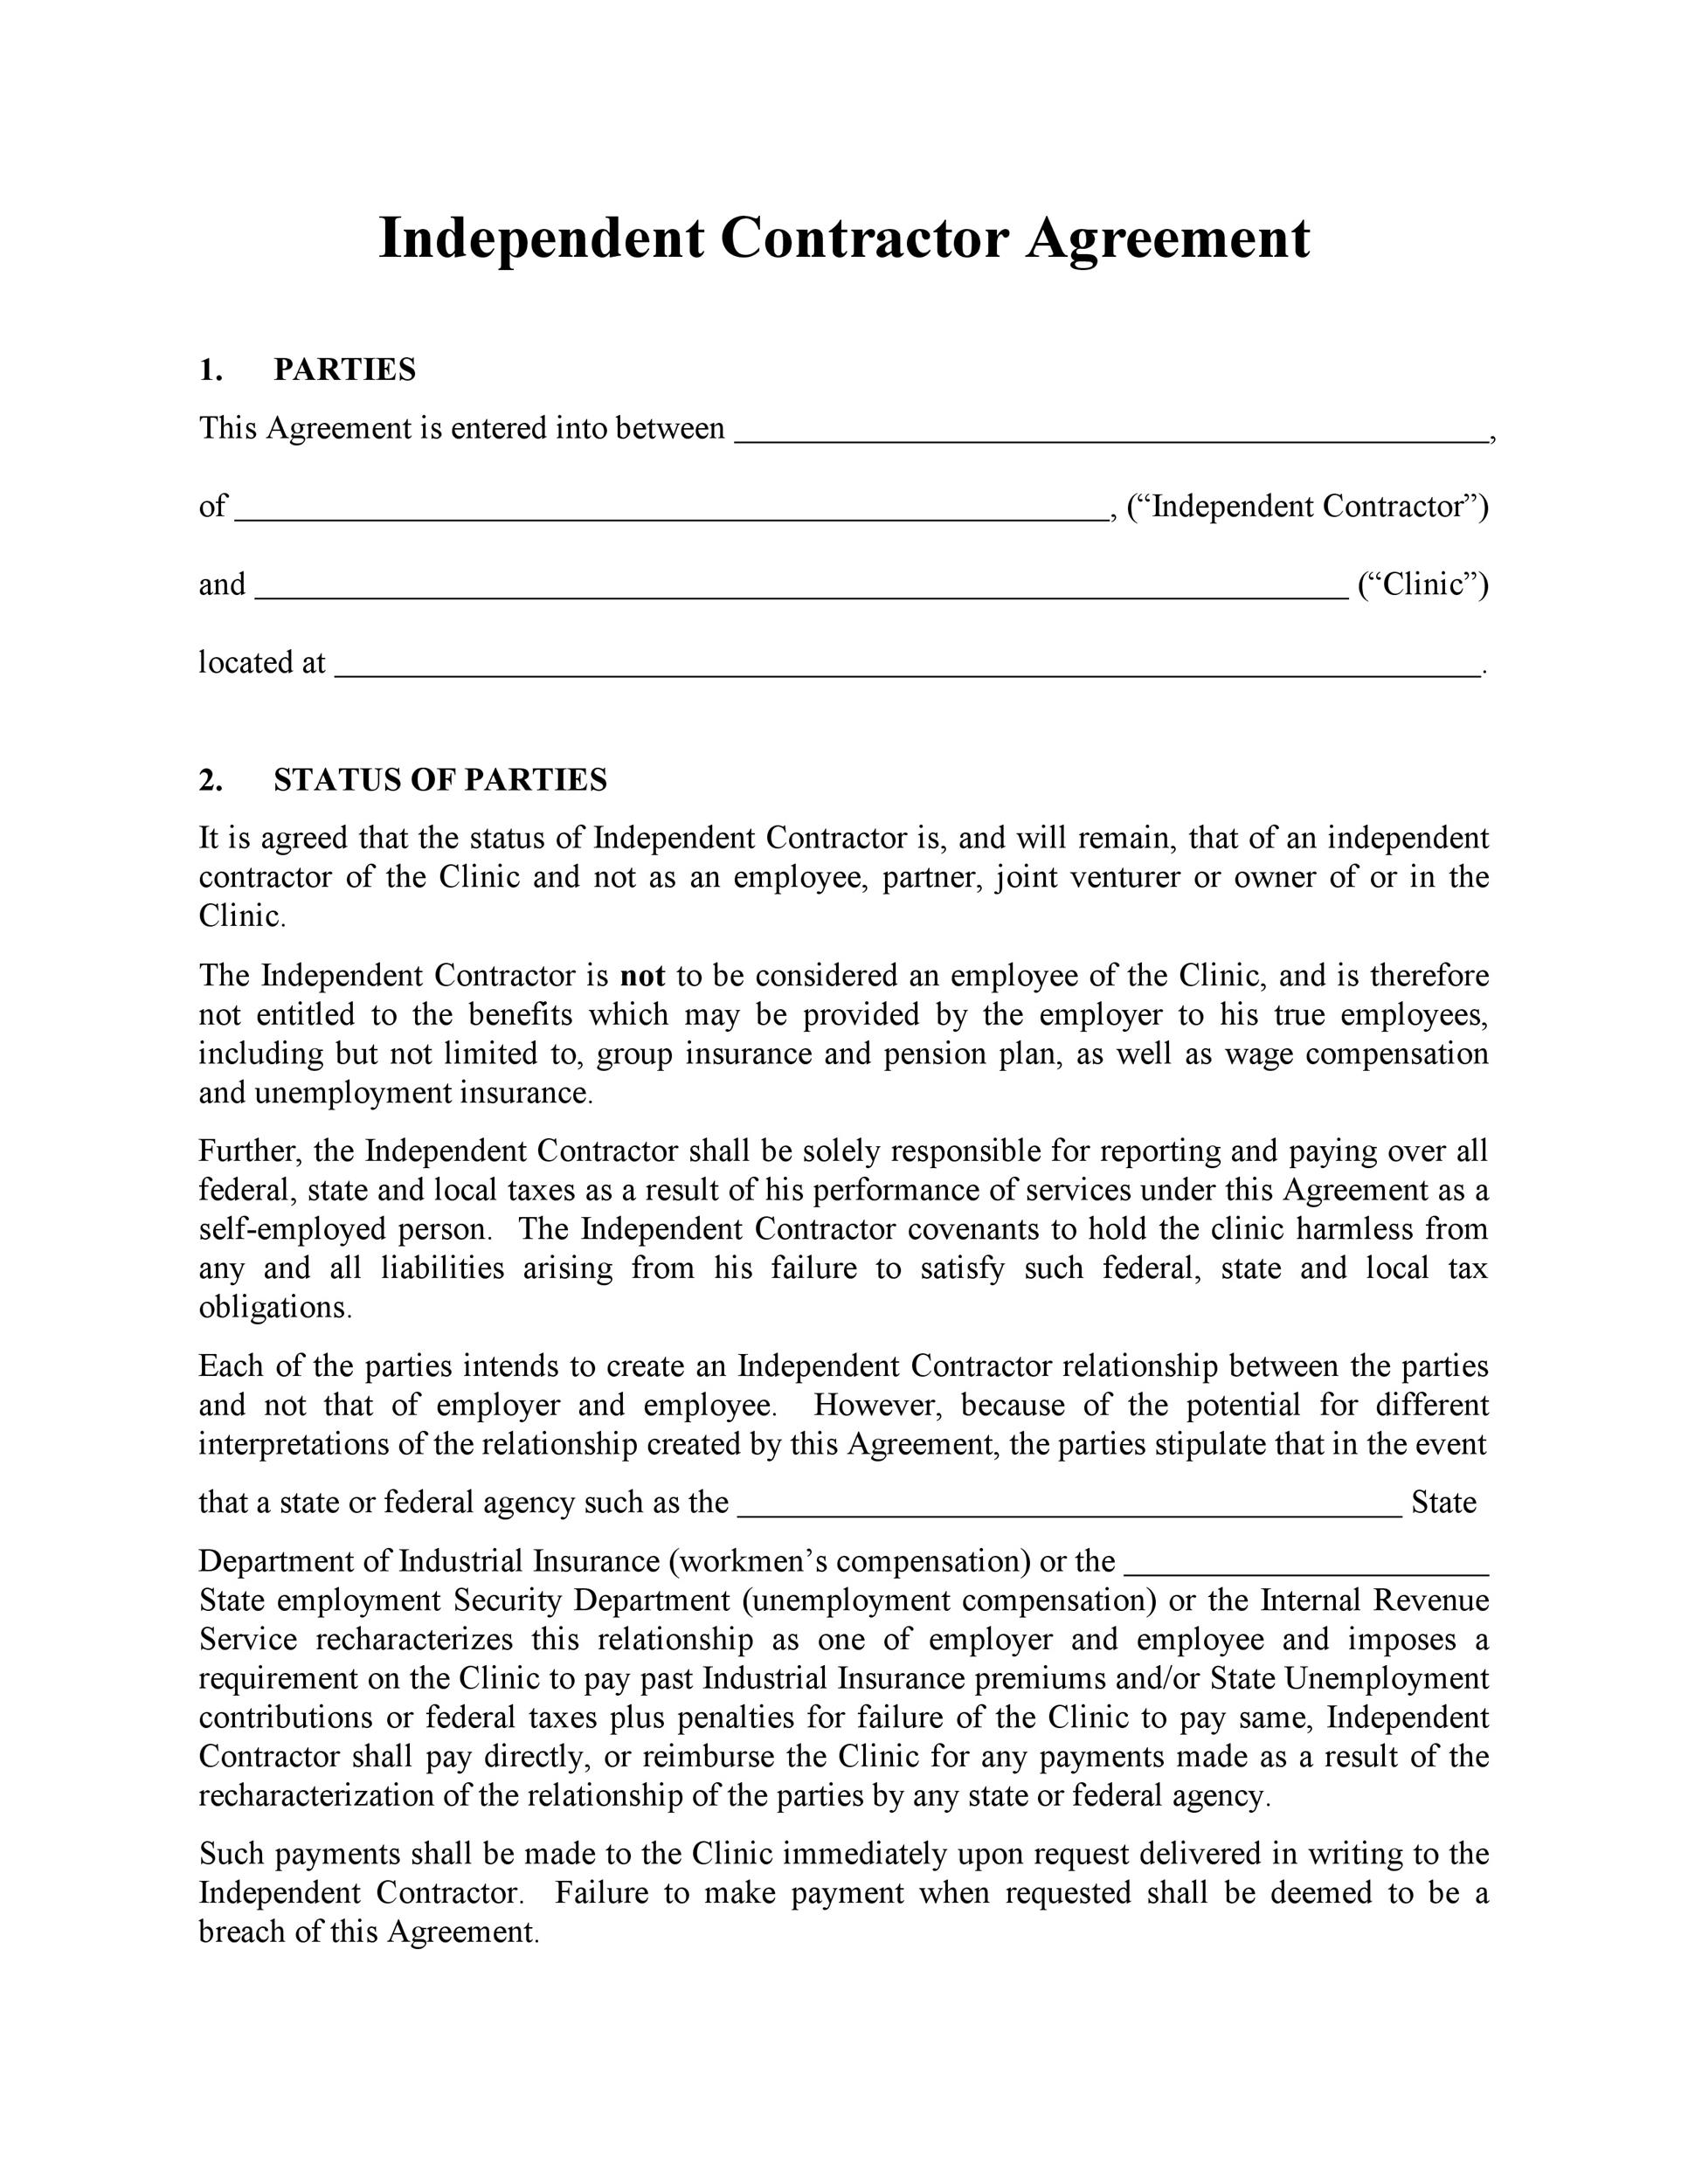 Free independent contractor agreement 39